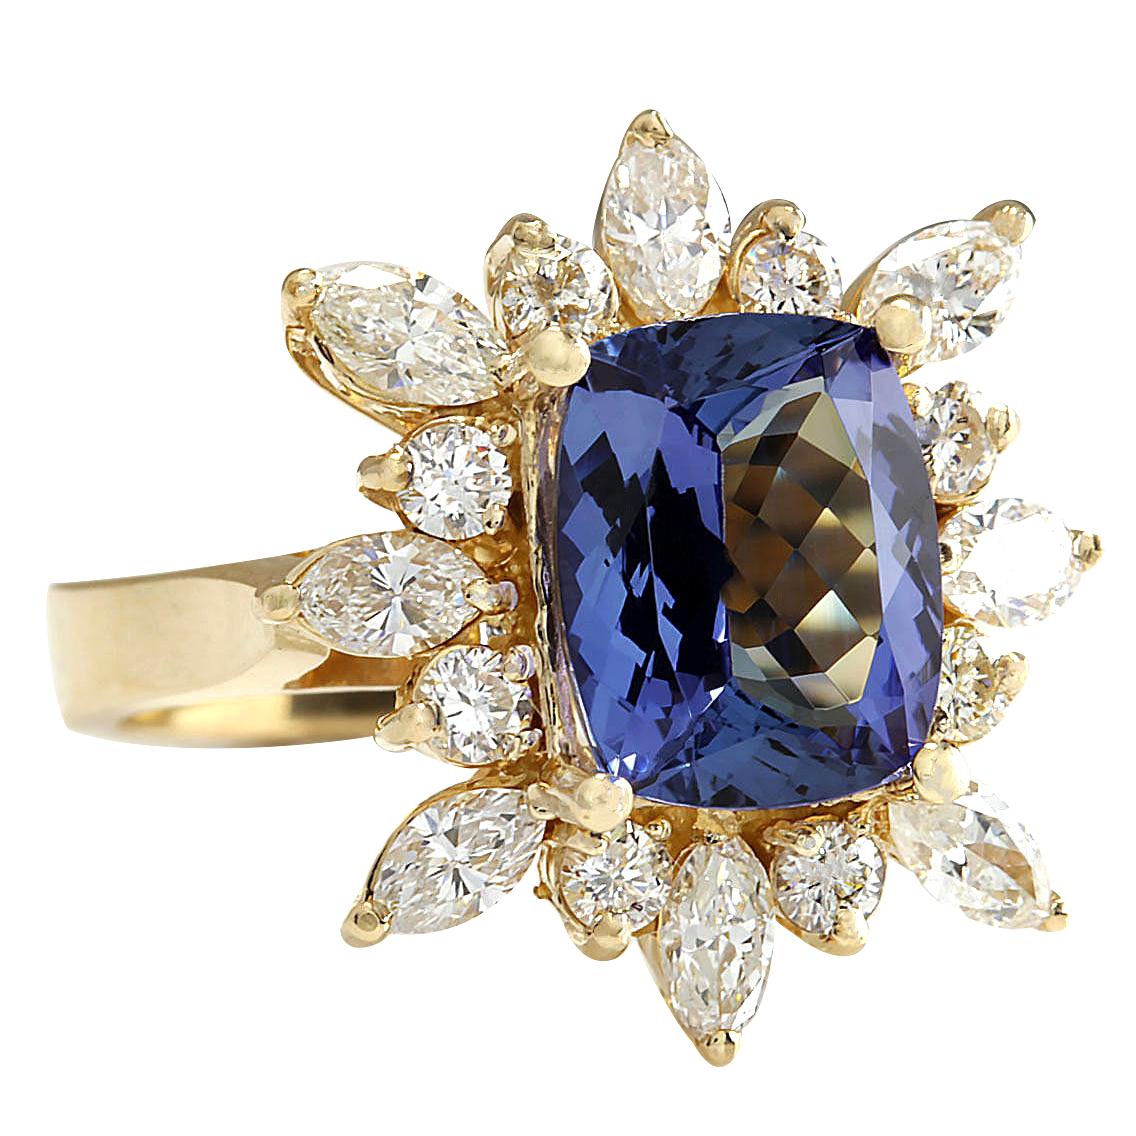 4.36 Carat Natural Tanzanite 14 Karat Yellow Gold Diamond Ring
Stamped: 14K Yellow Gold
Total Ring Weight: 7.2 Grams
Total Natural Tanzanite Weight is 2.86 Carat (Measures: 10.00x8.00 mm)
Color: Blue
Total Natural Diamond Weight is 1.50 Carat
Color: